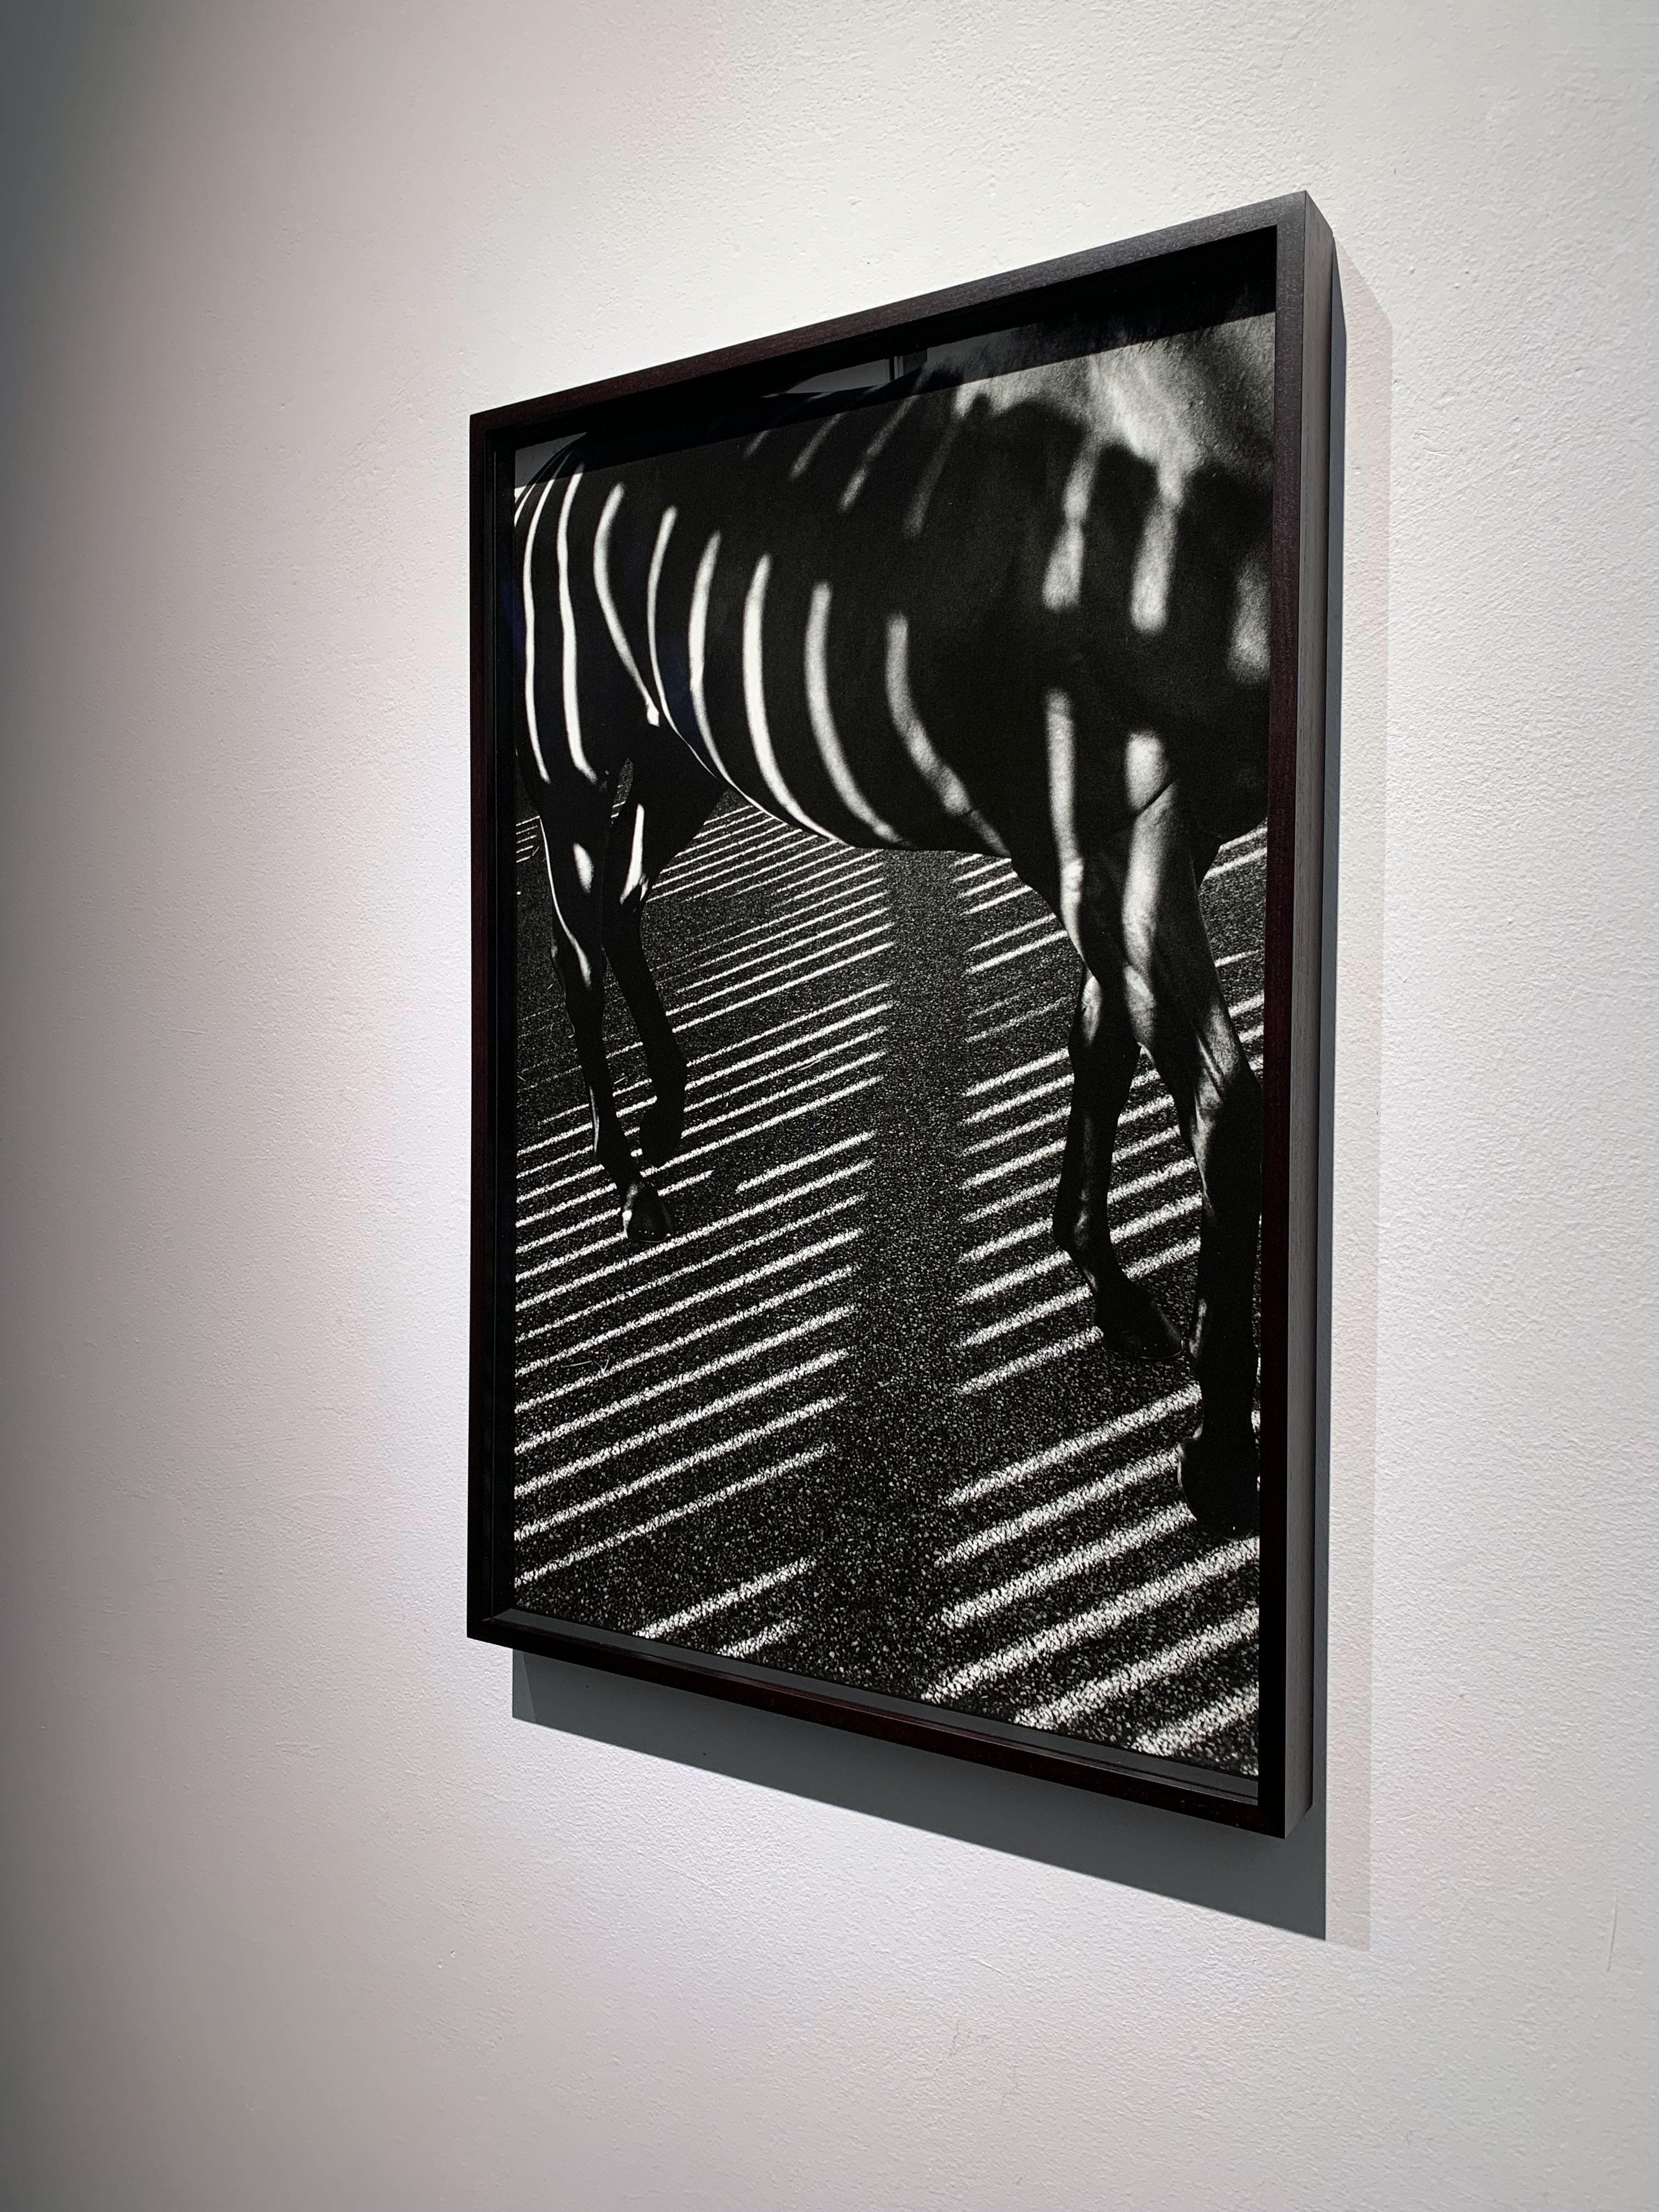 Dubawi, ‘Striped/ shadows', Abstract Black and white horse portrait photograph - Photograph by John Reardon